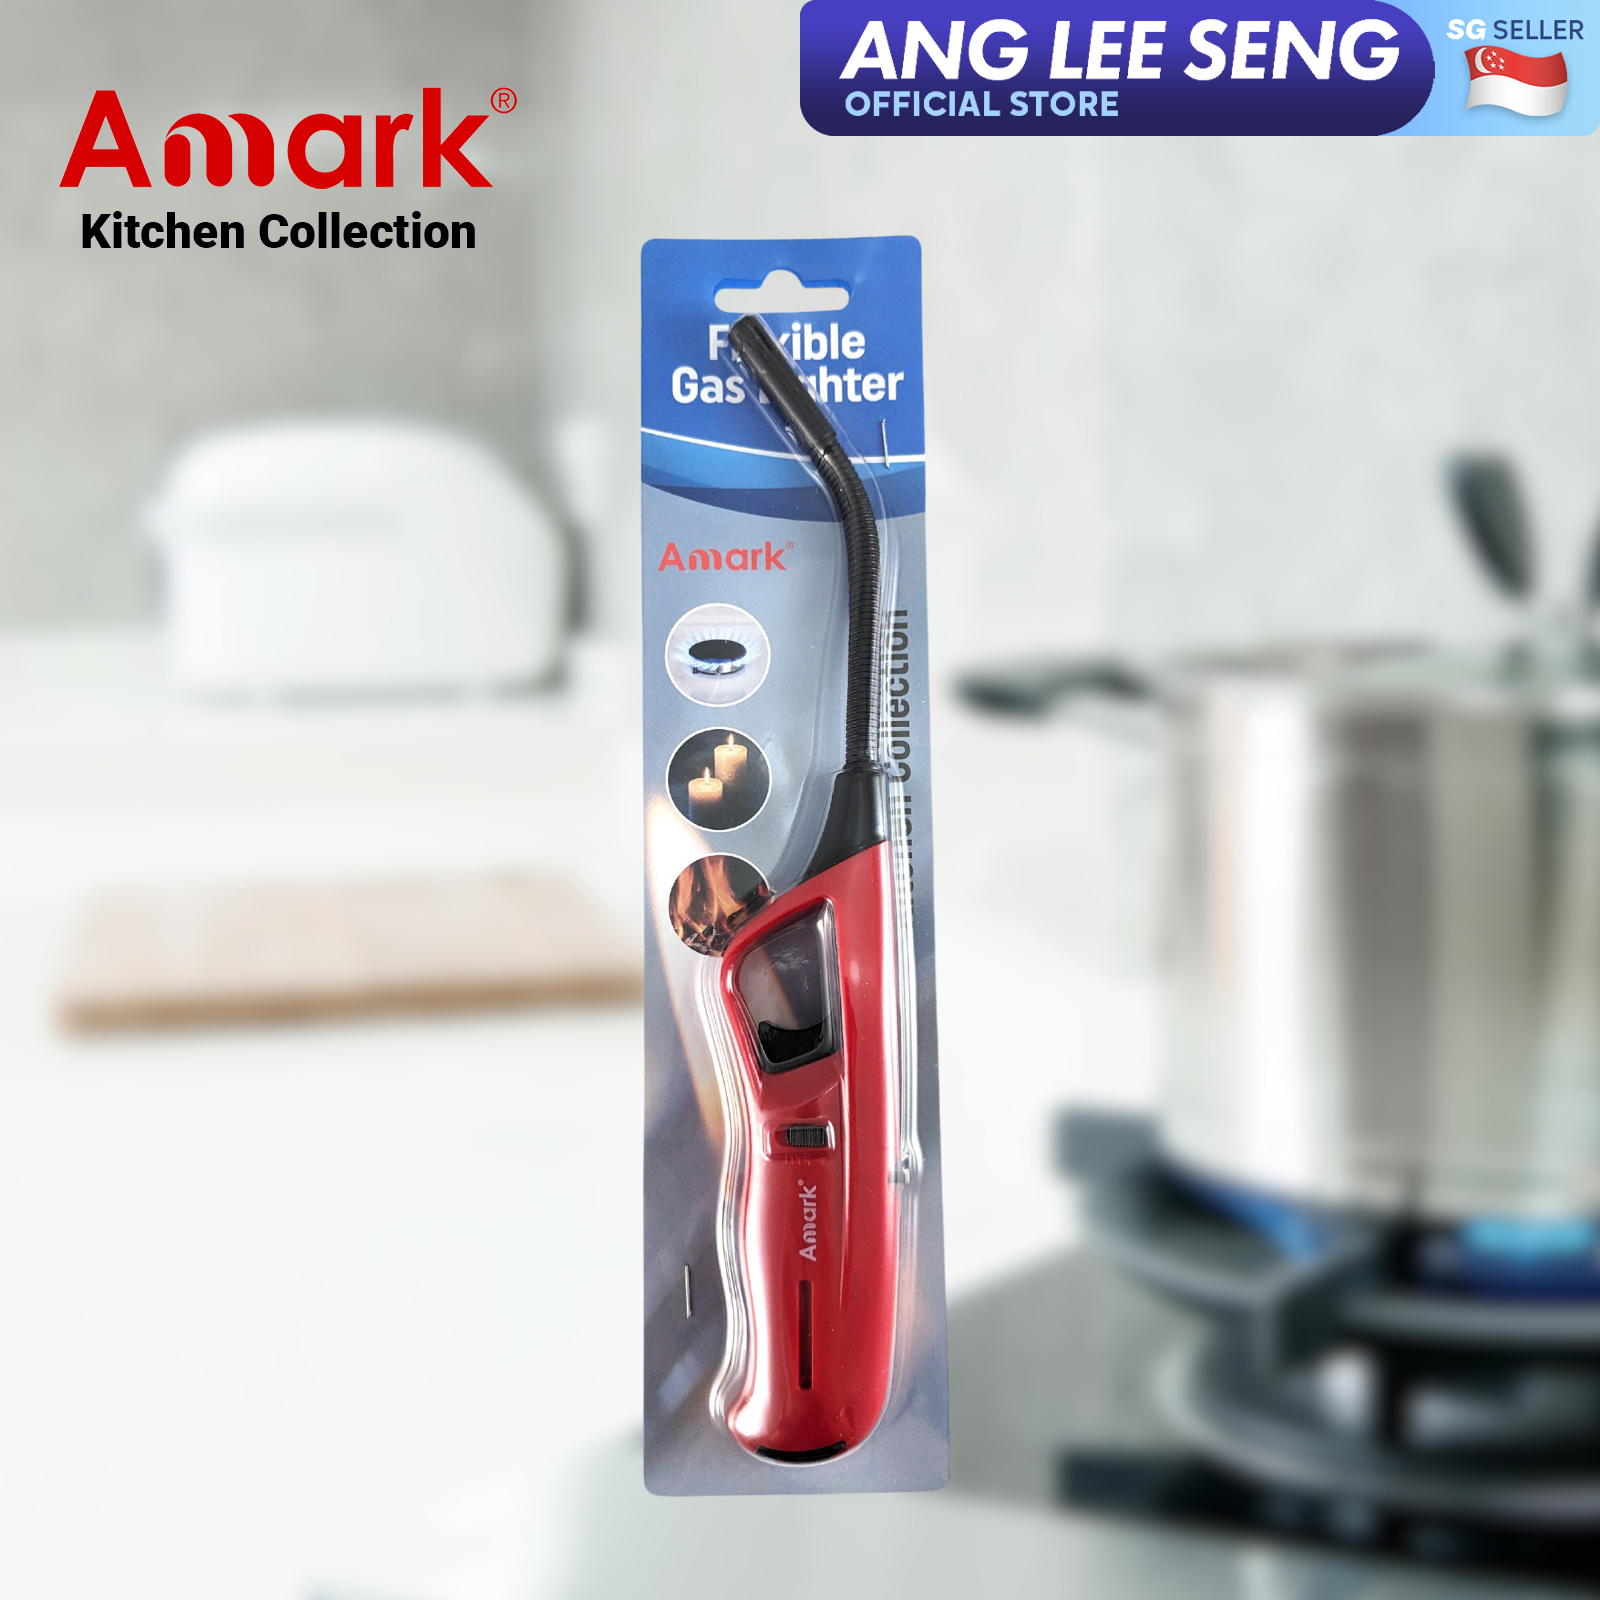 Amark Kitchen Collection Flexible Refillable Gas Lighter - Adjustable Flame & Safety Lock